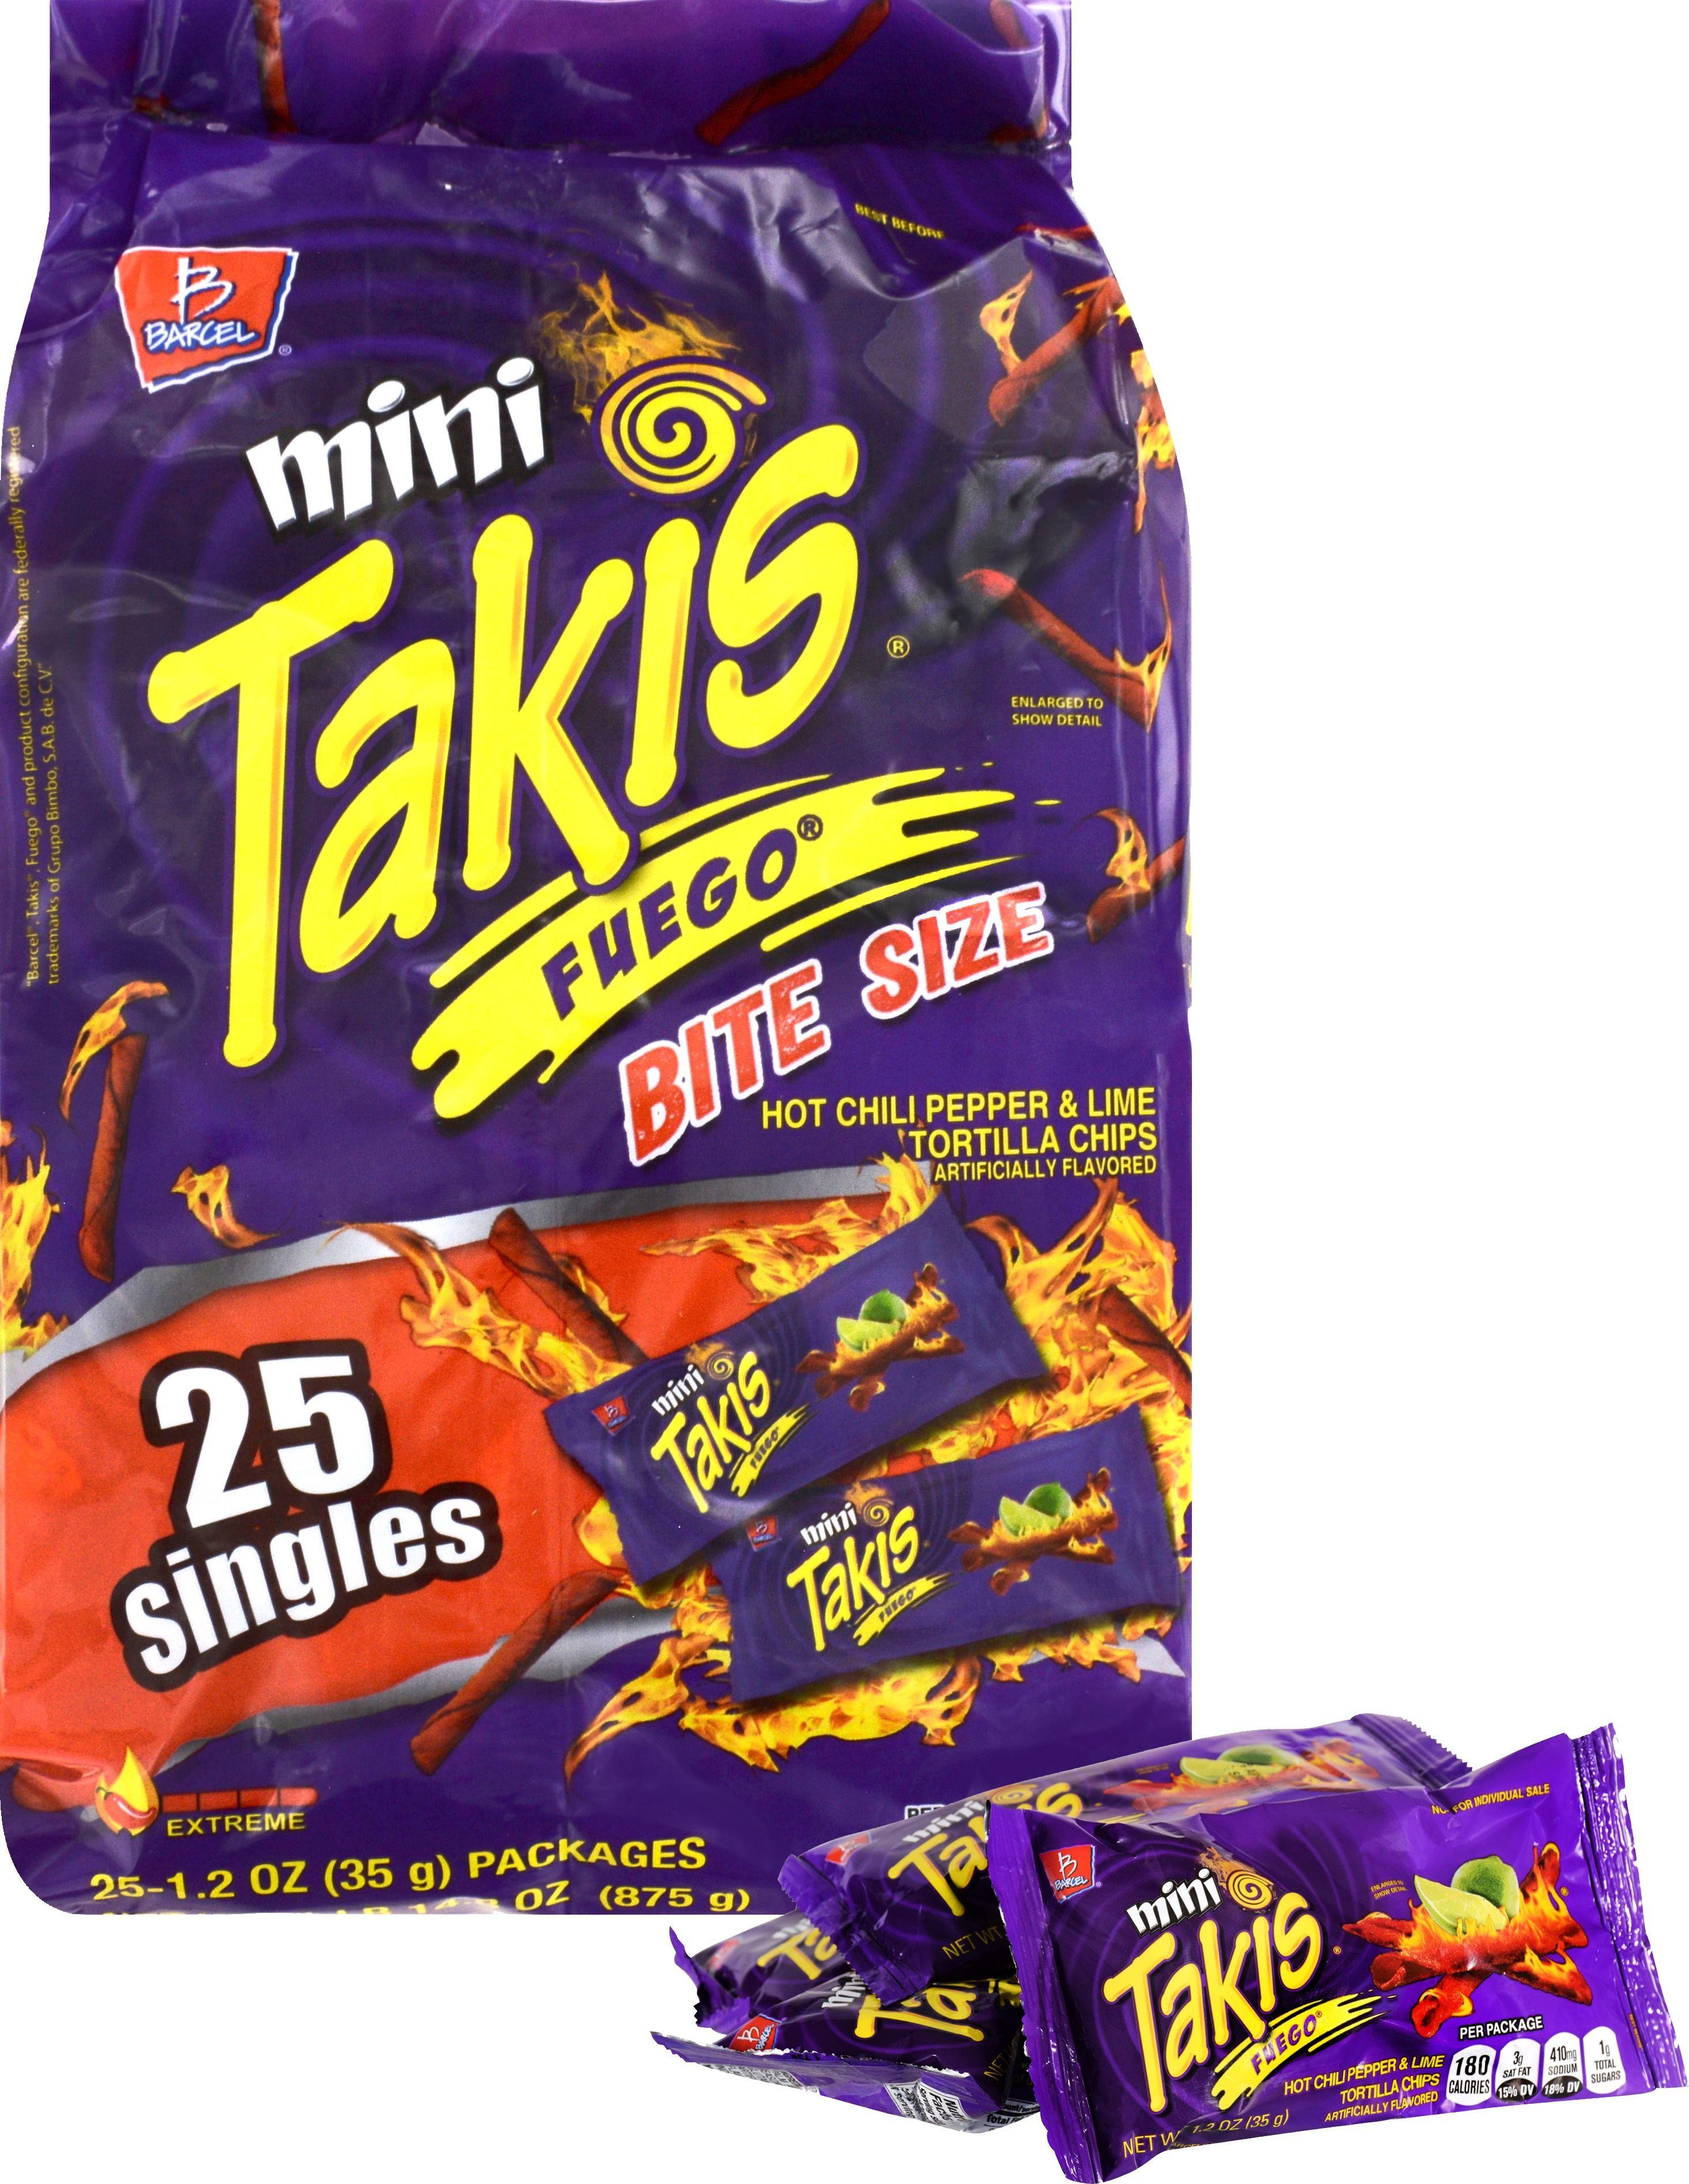 Takis Rolled Mini Fuego Tortilla Chips - 30.75oz/25ct